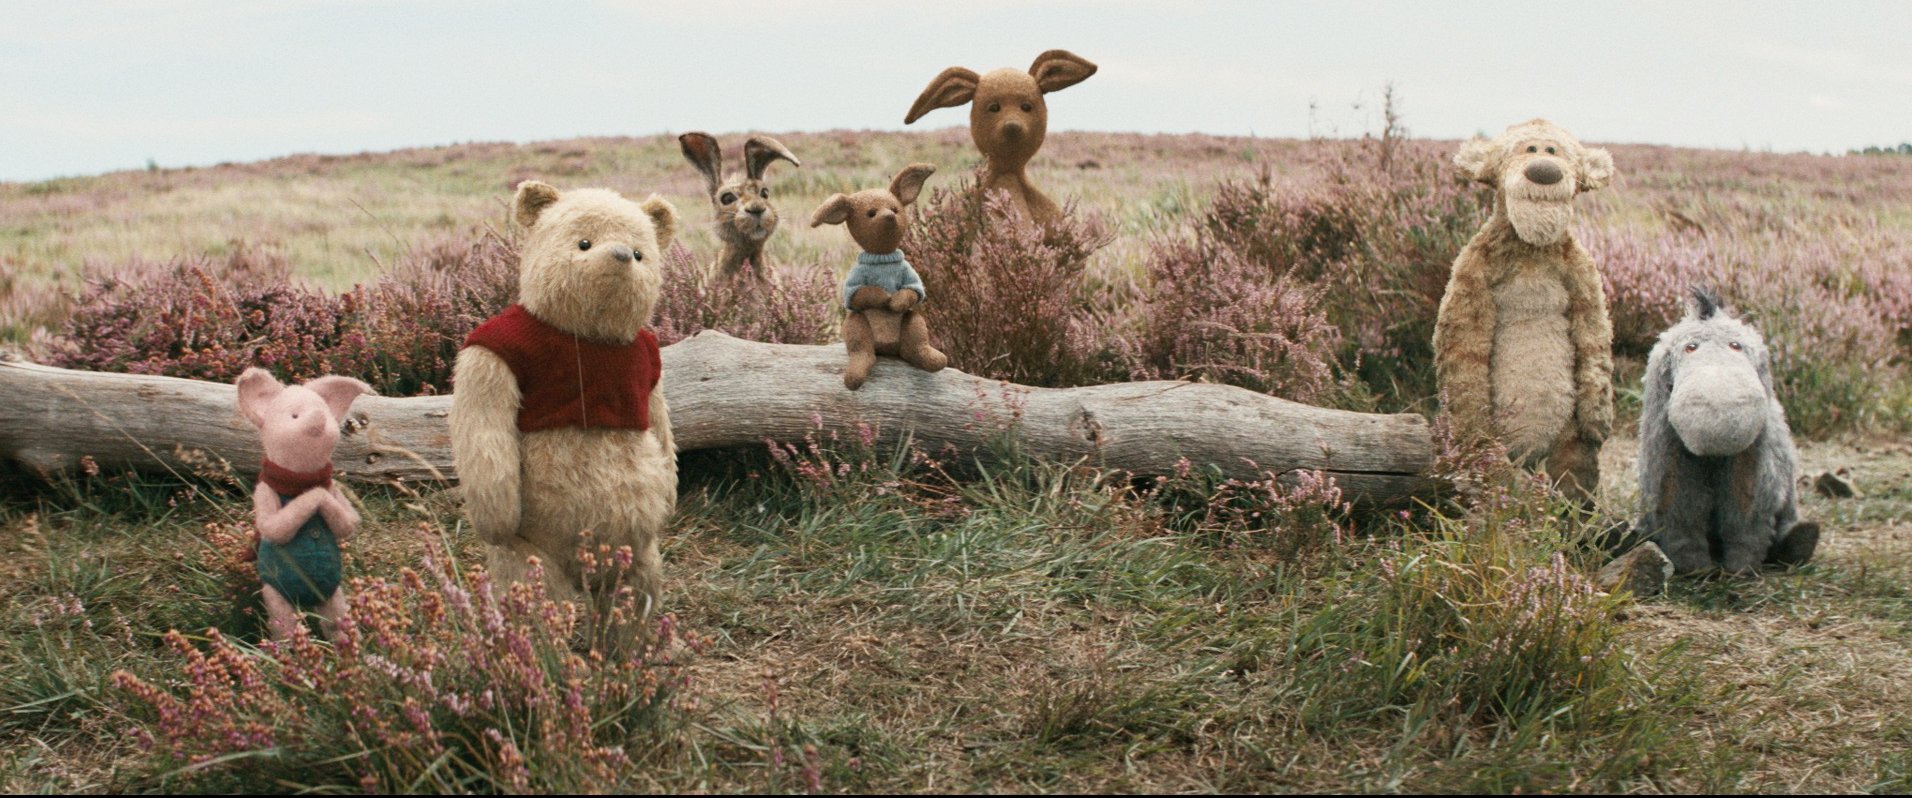 stuffed animals from christopher robin